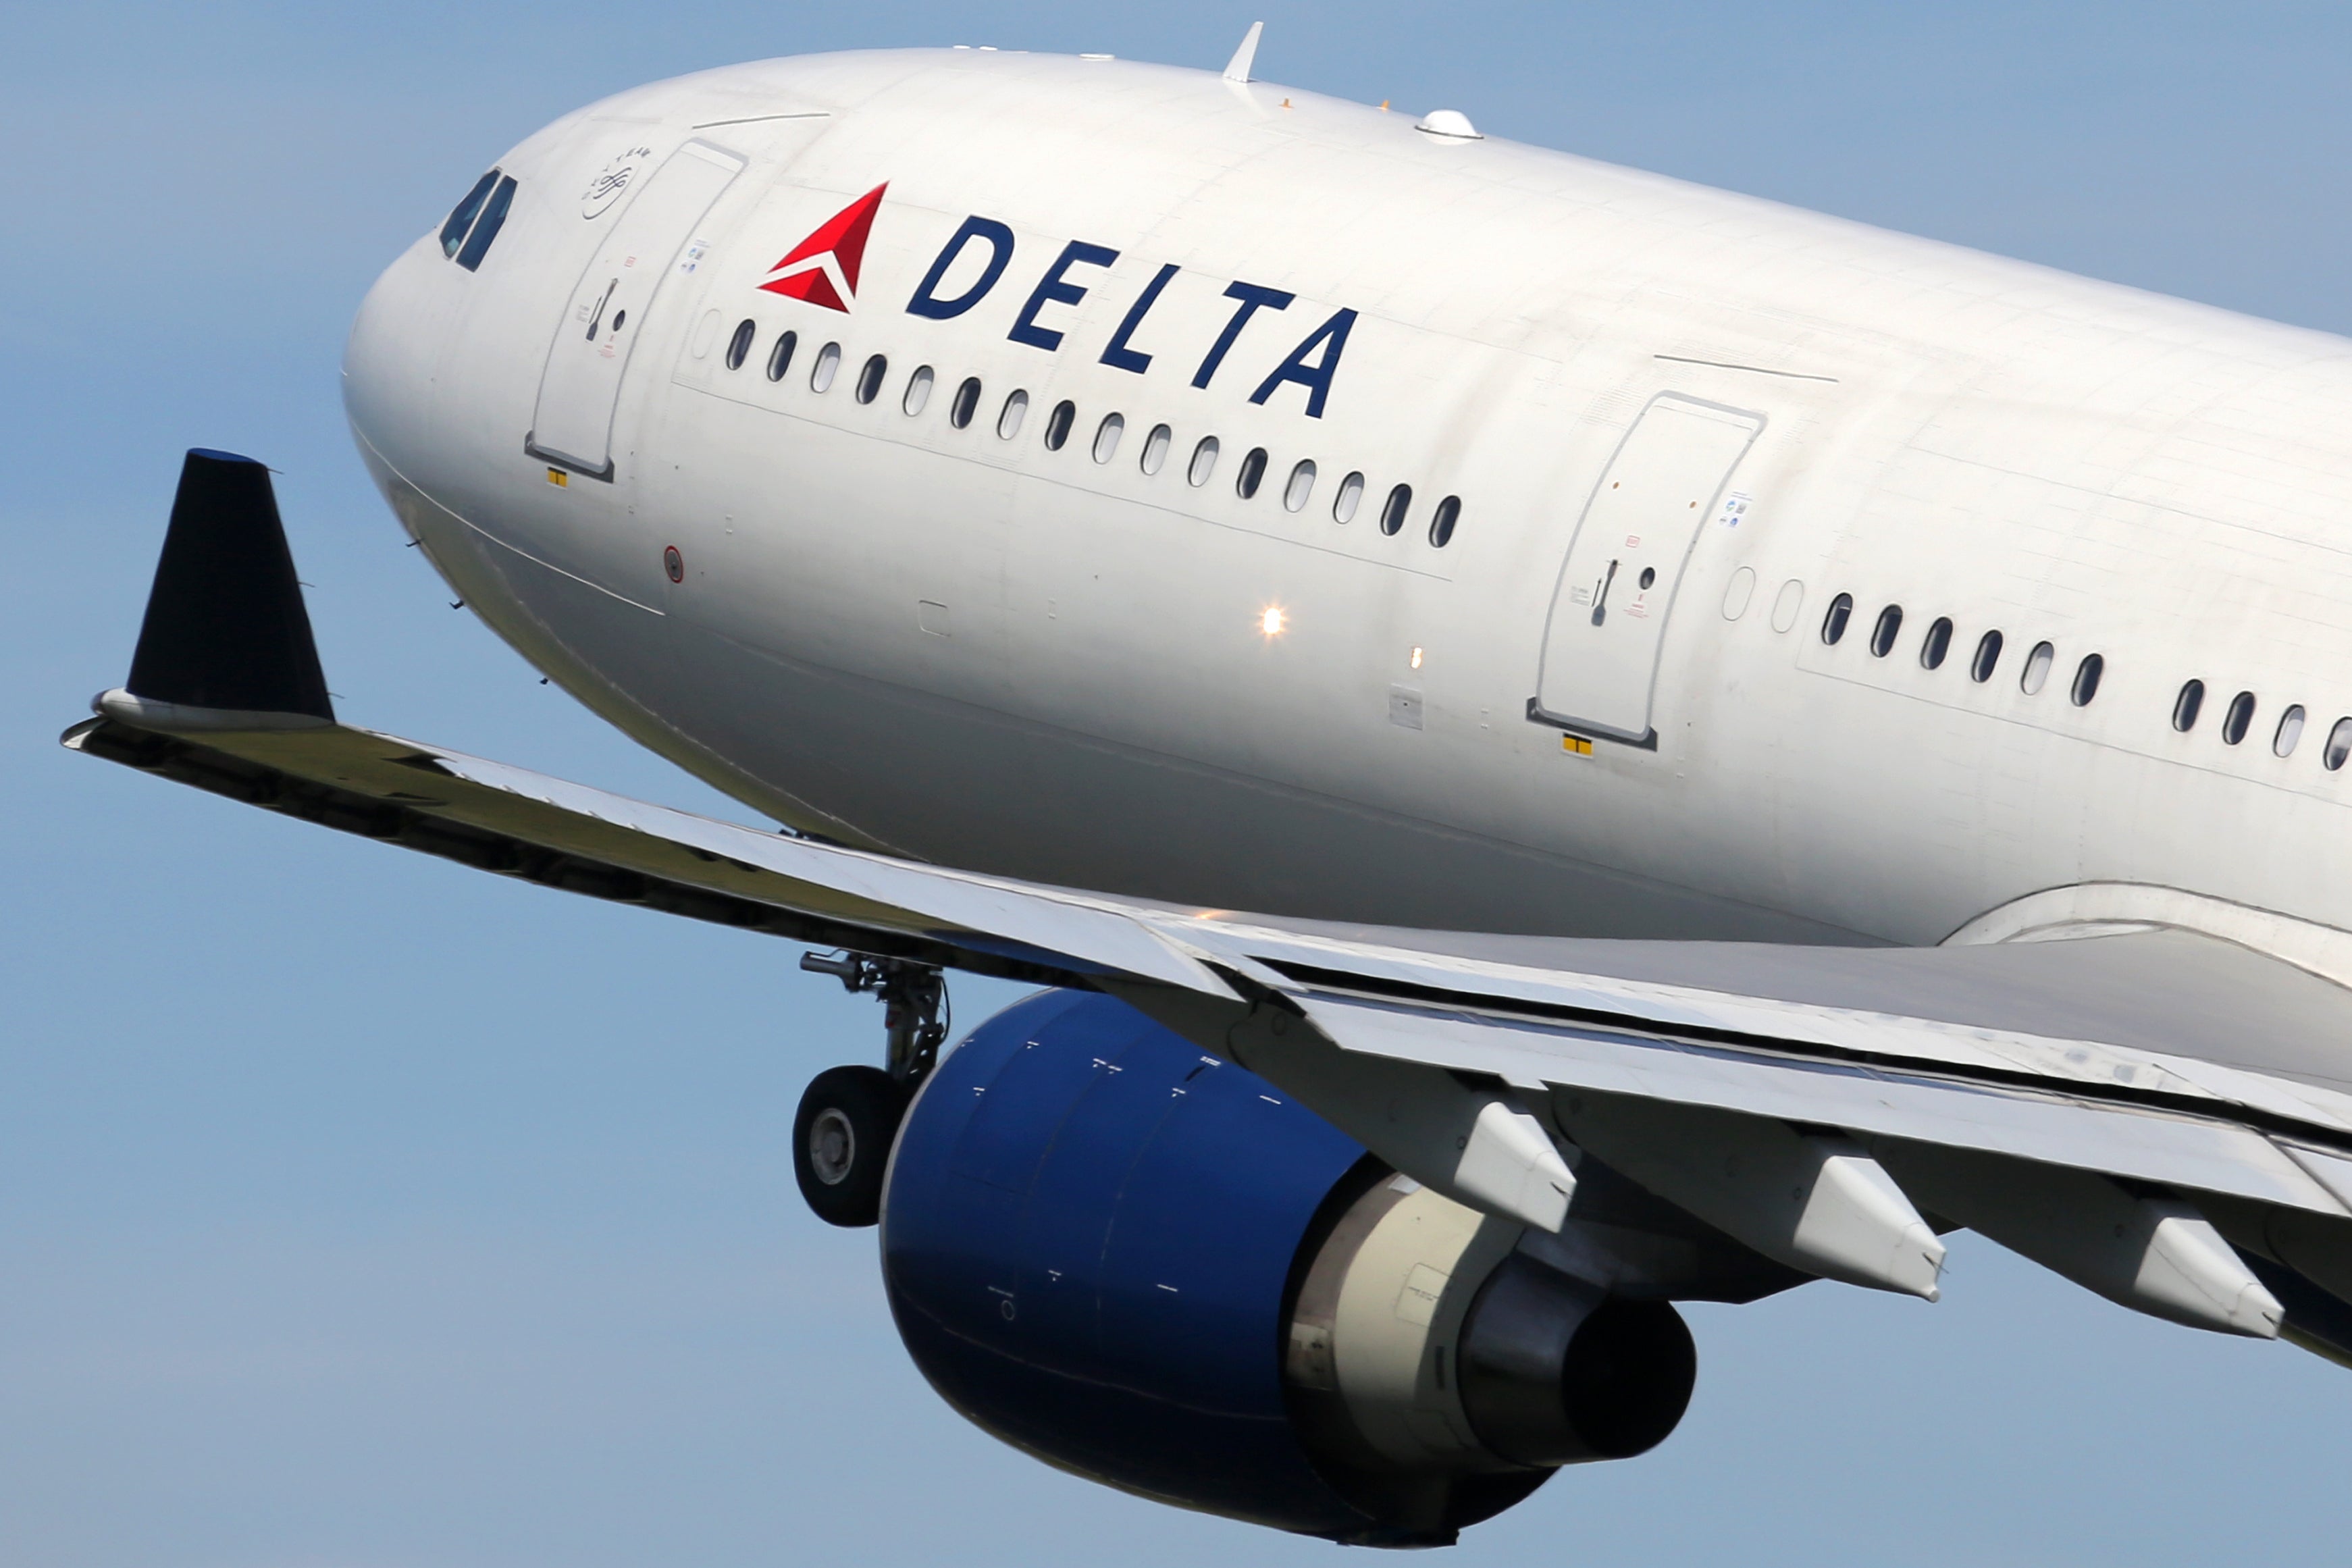 A Delta Airlines Airbus A330 departs from Amsterdam Airport